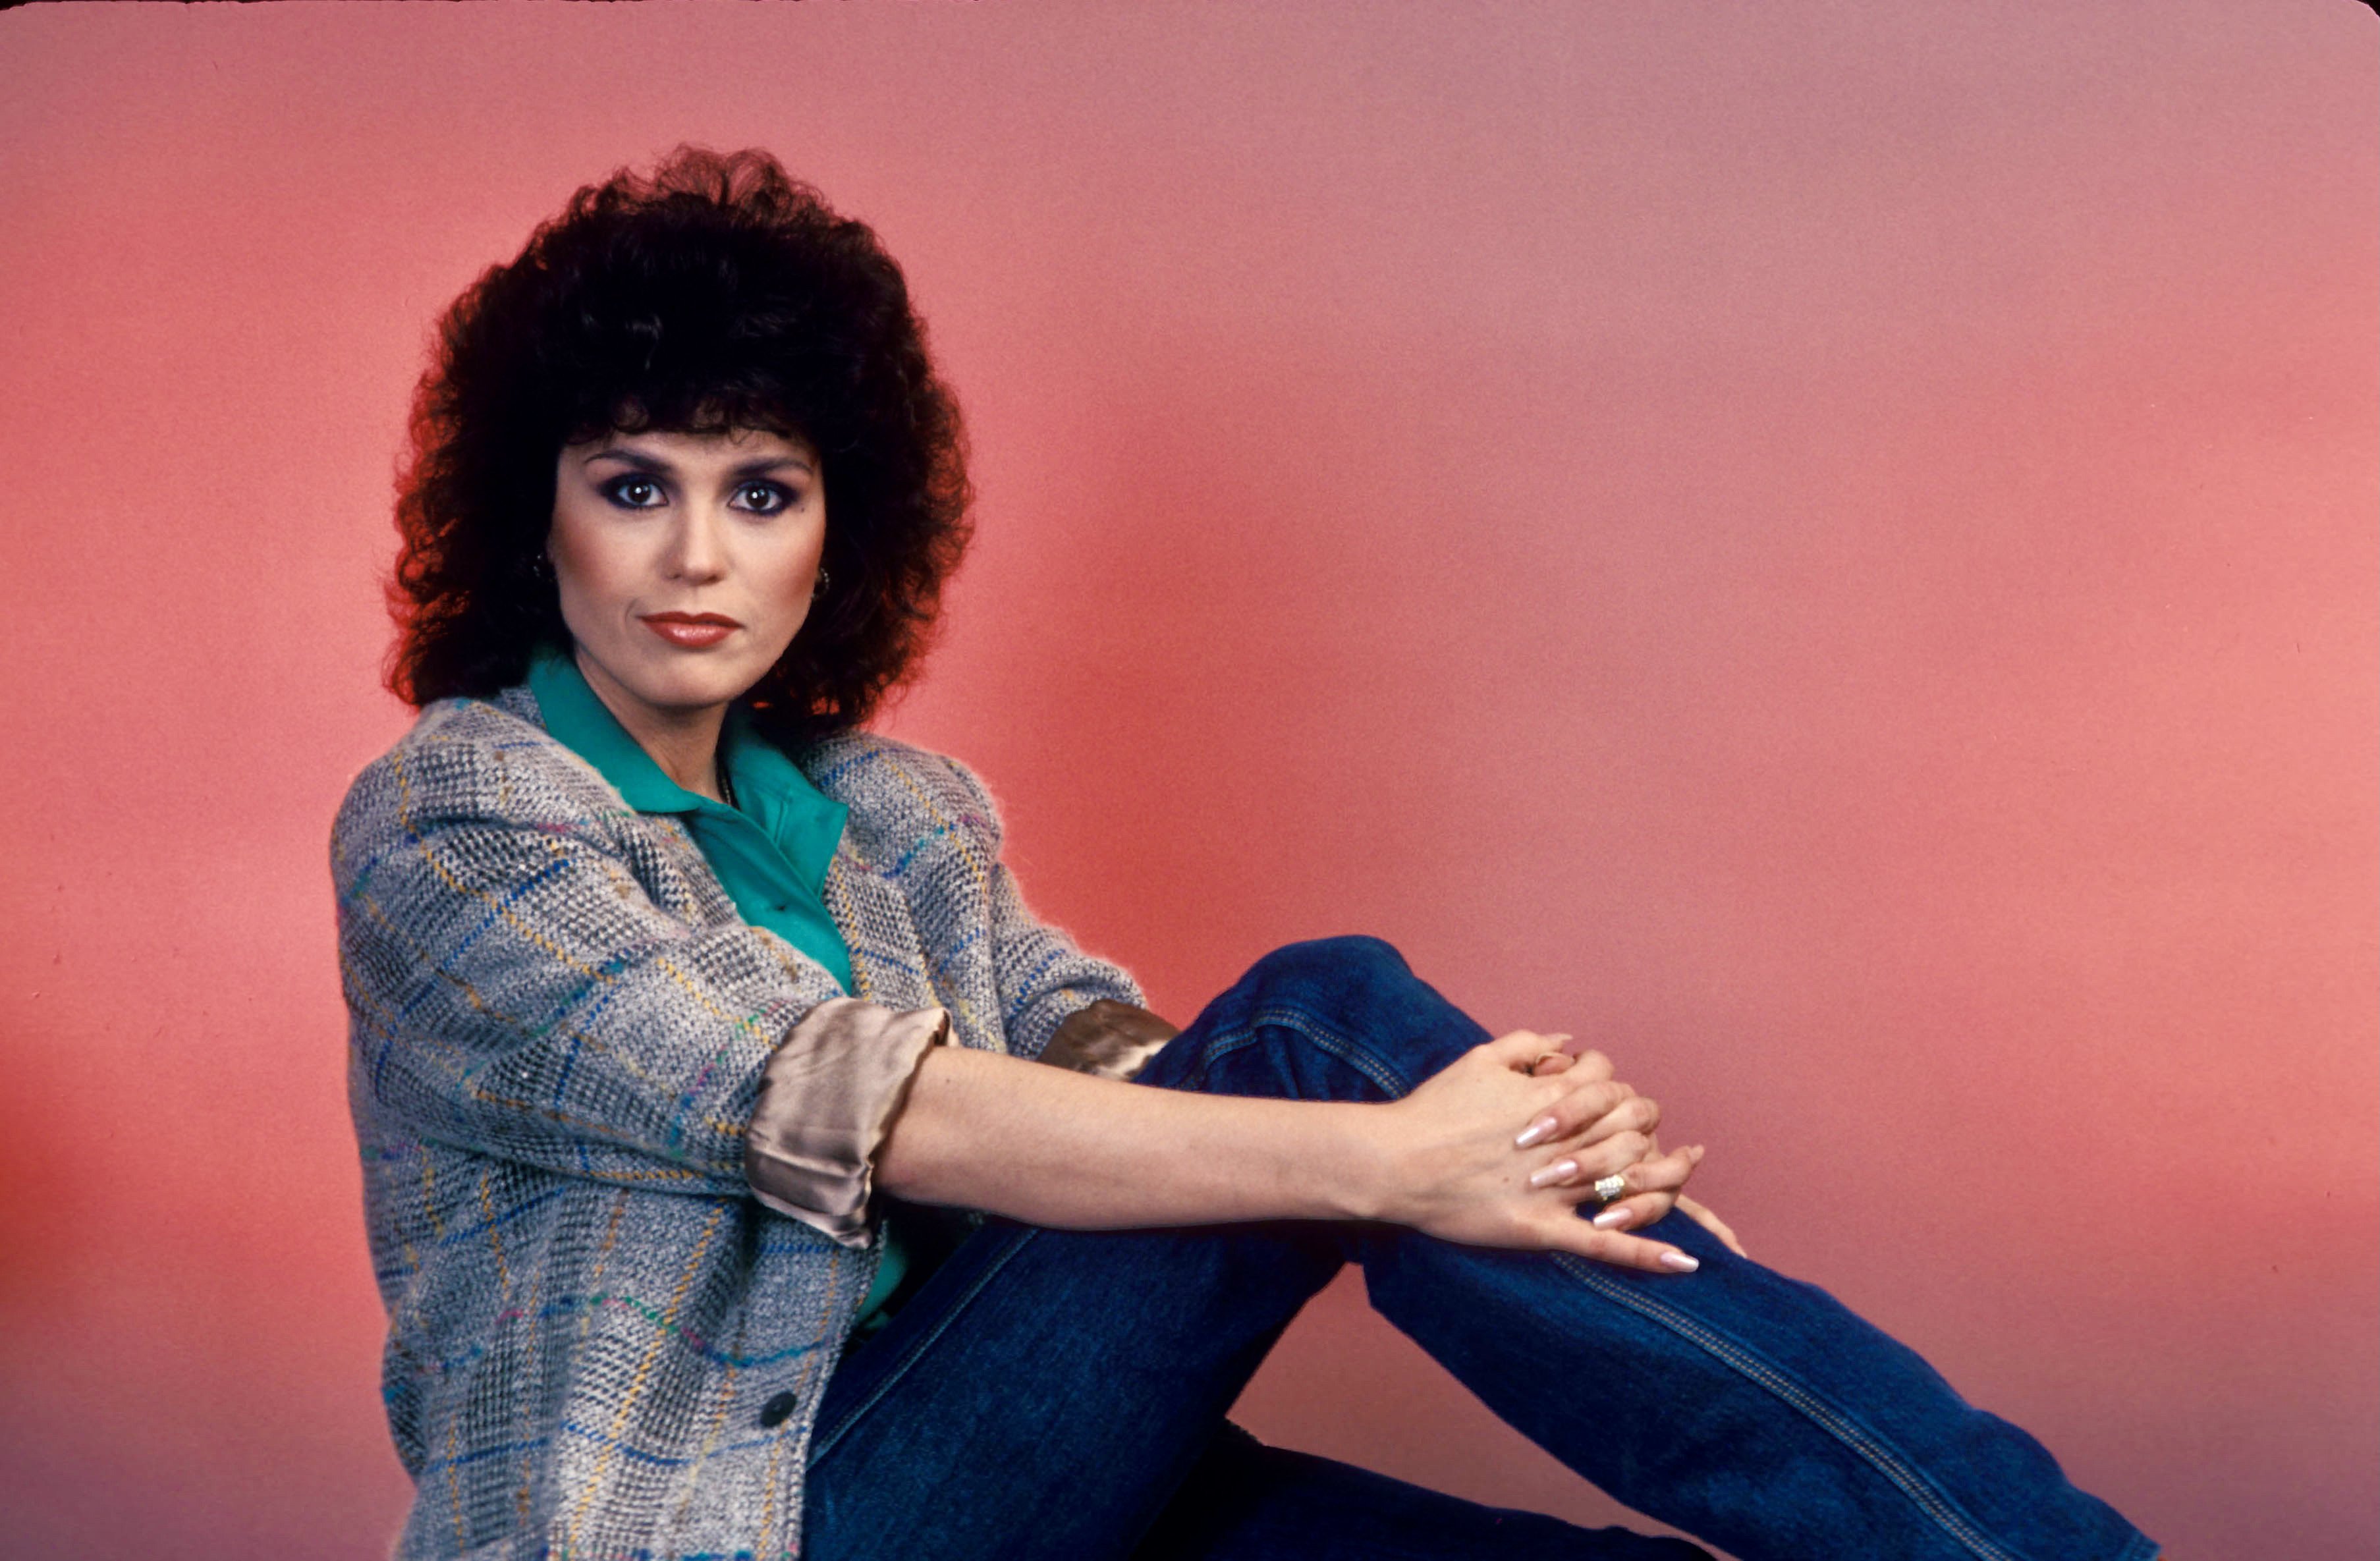 Singer and actress Marie Osmond poses for a portrait circa 1983 in Provo, Utah | Source: Getty Images